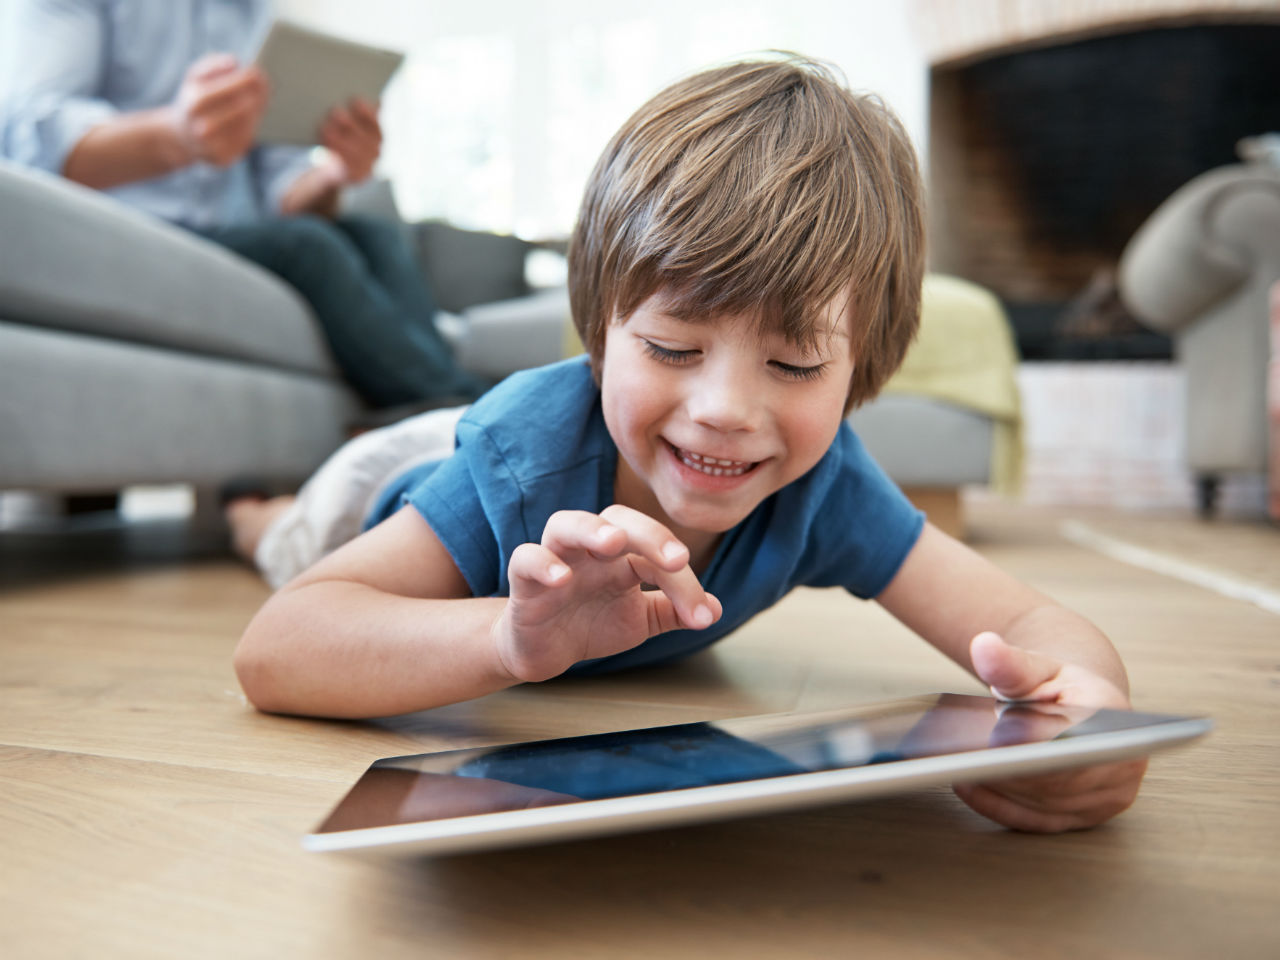 Little boy playing with tablet on floor